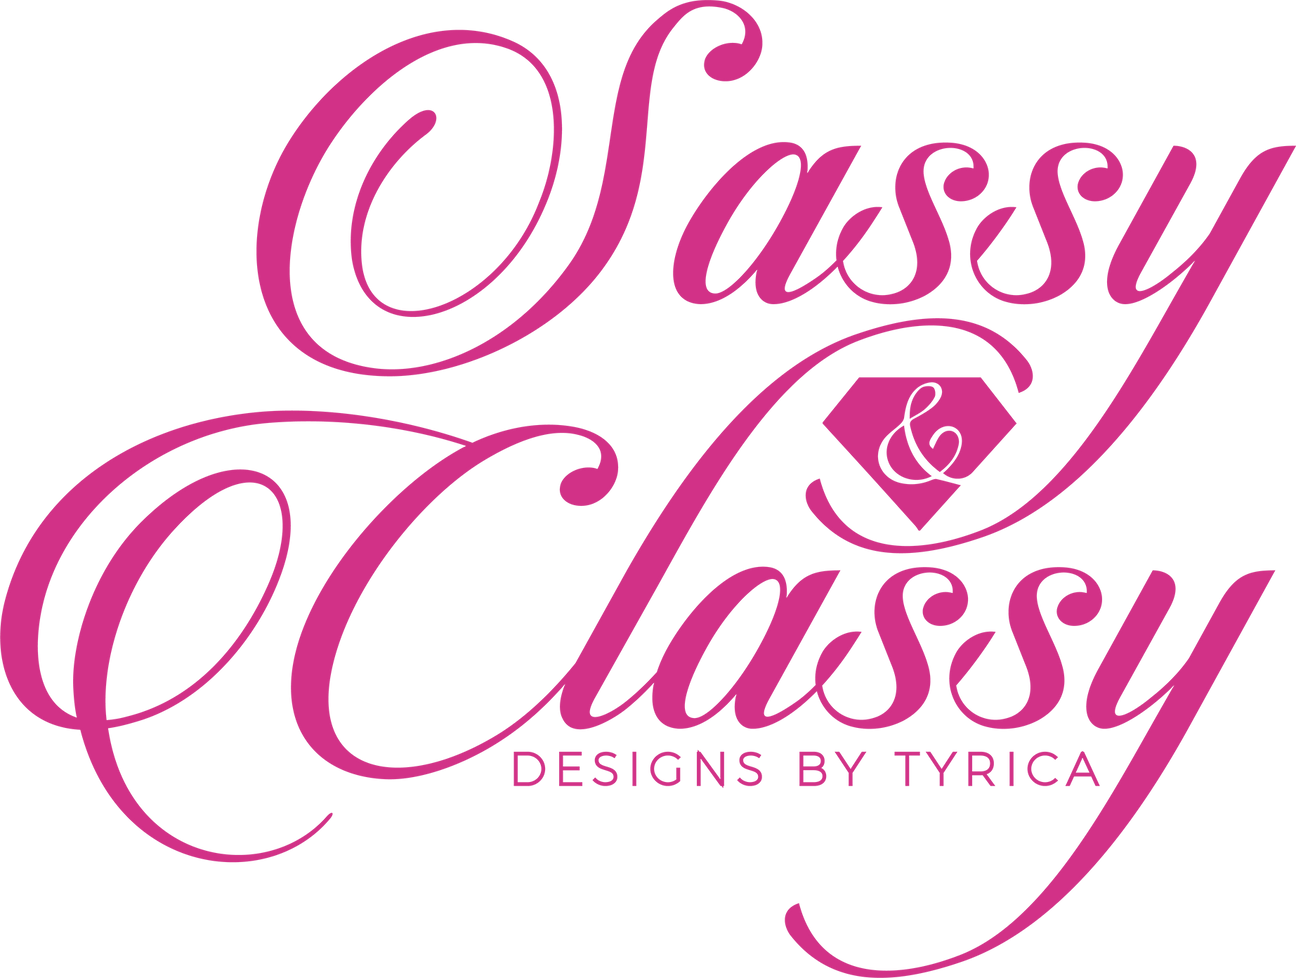 Life Of The Party Exclusives Sassy And Classy Designs By Tyrica